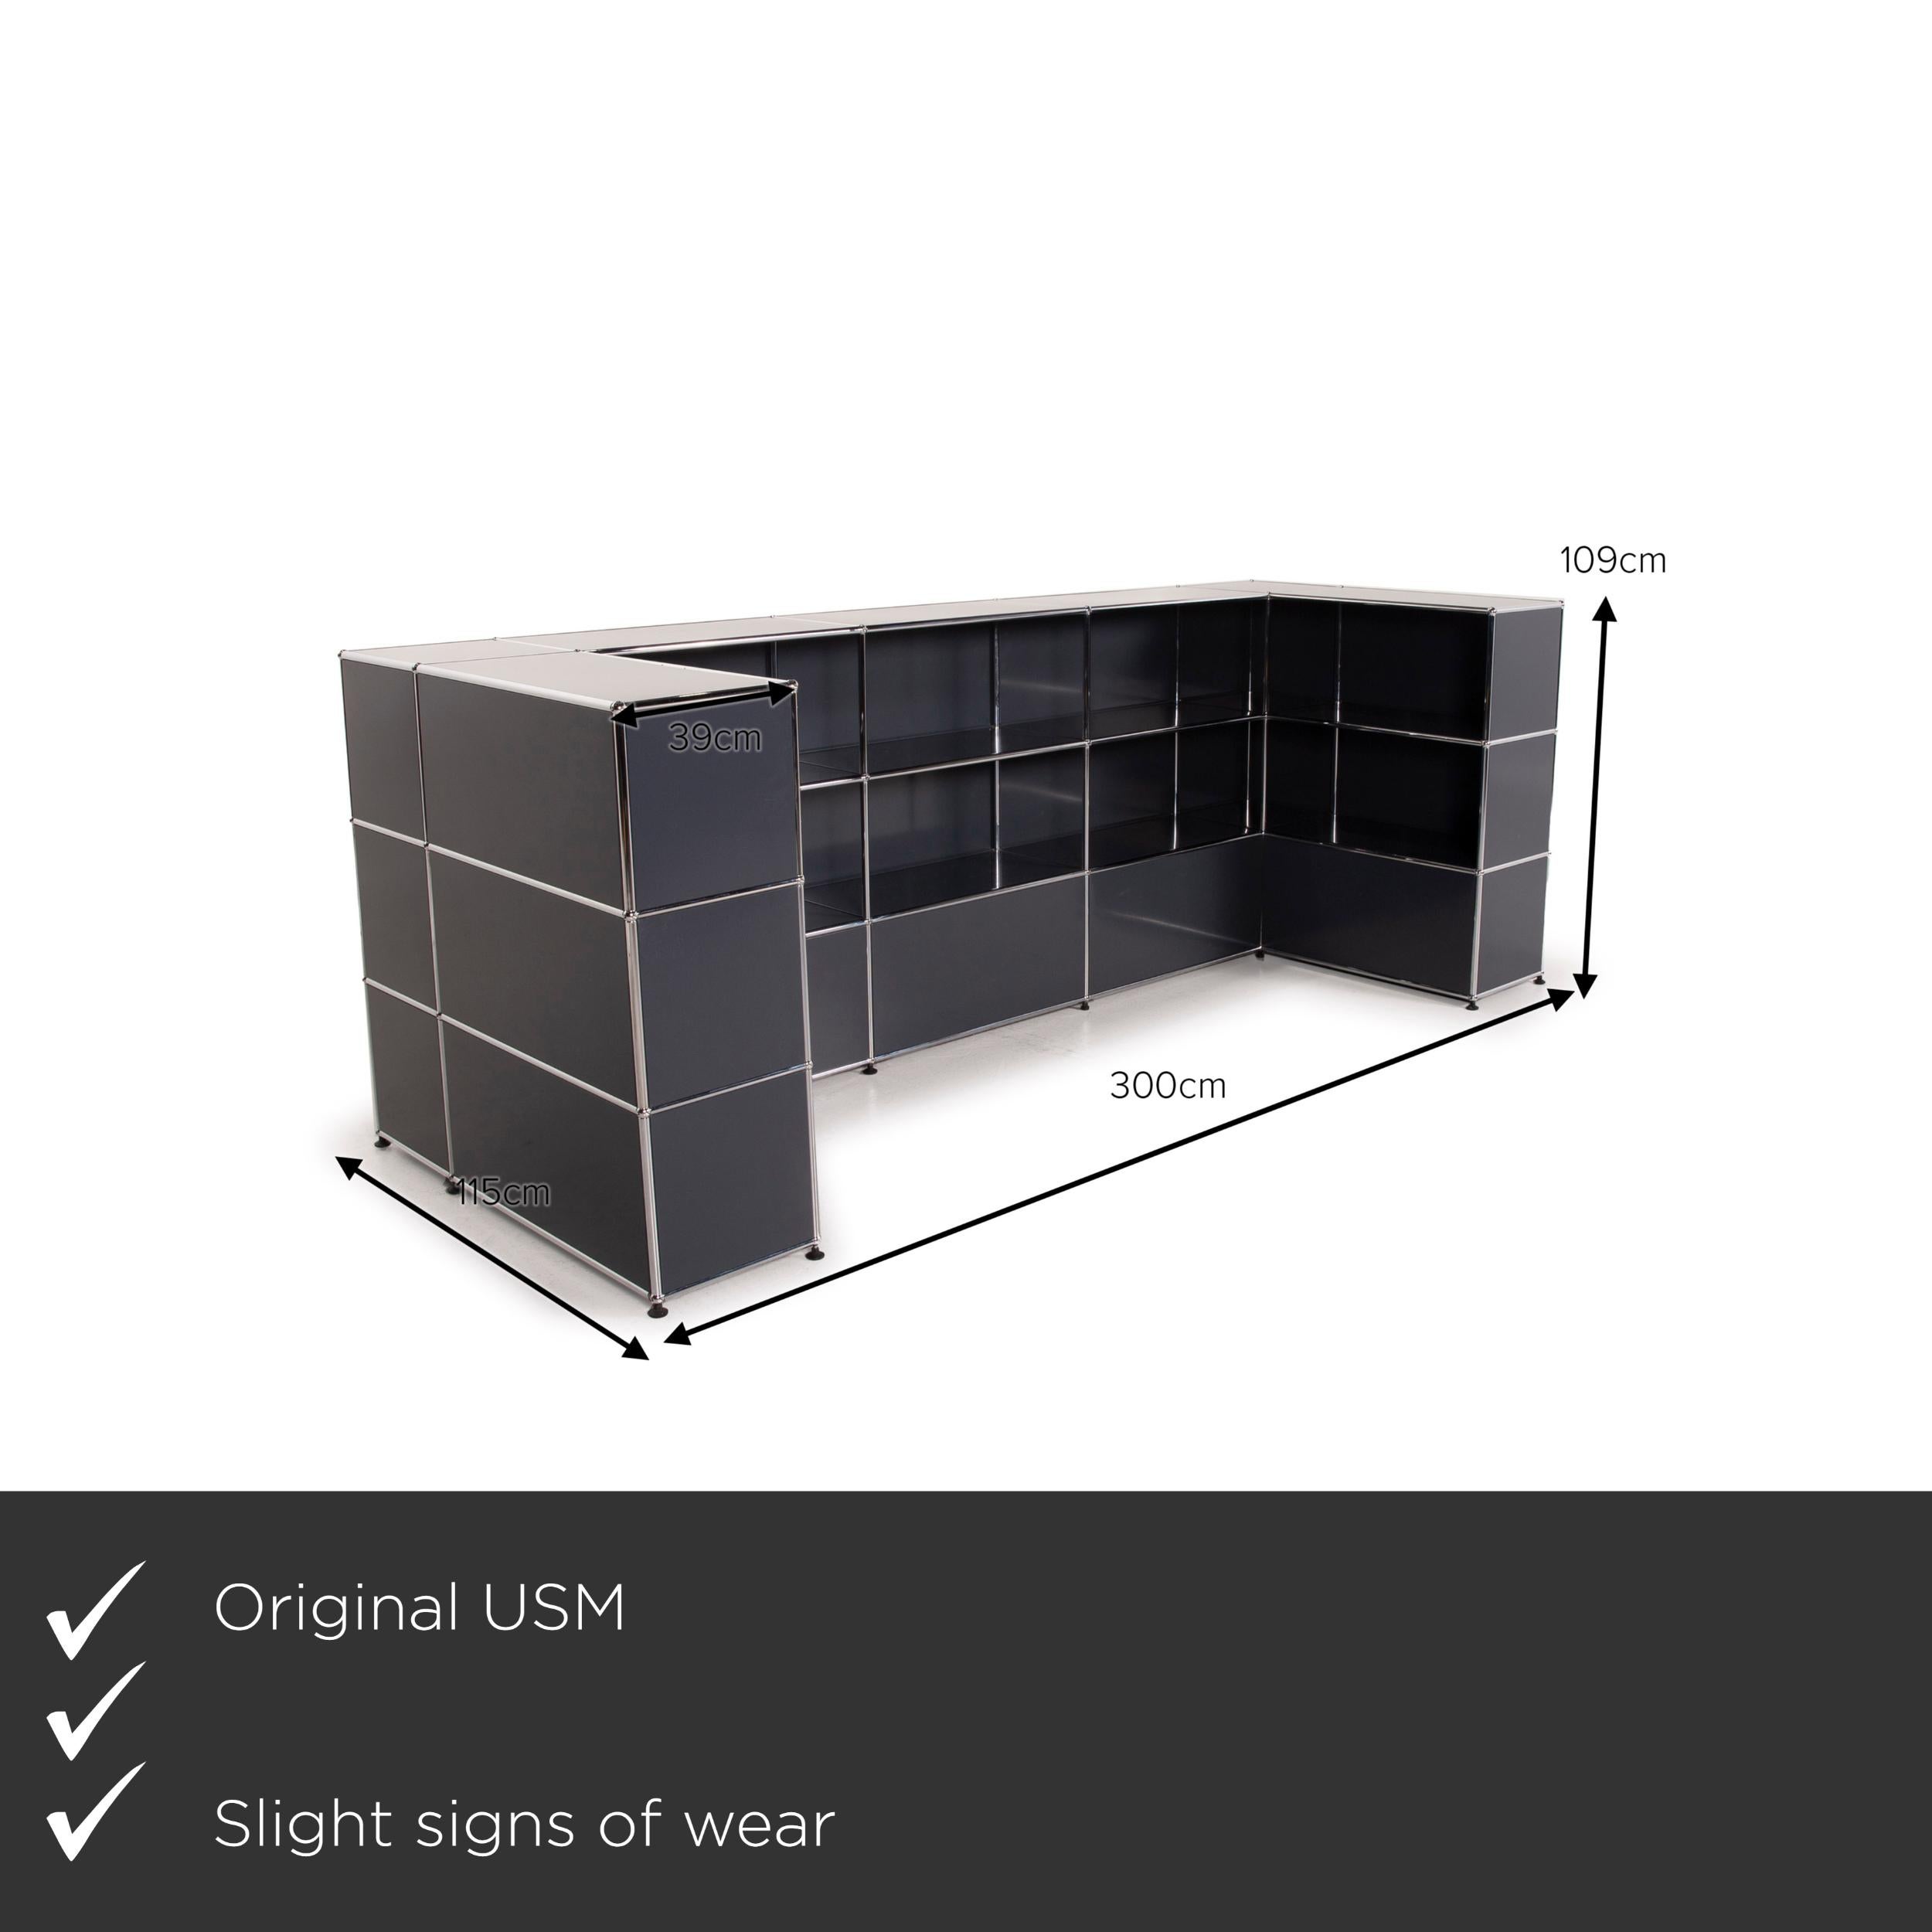 We present to you an USM Haller metal sideboard gray modular counter office shelf highboard.
 

 Product measurements in centimeters:
 

Depth: 115
 Width: 300
 Height: 109.





 